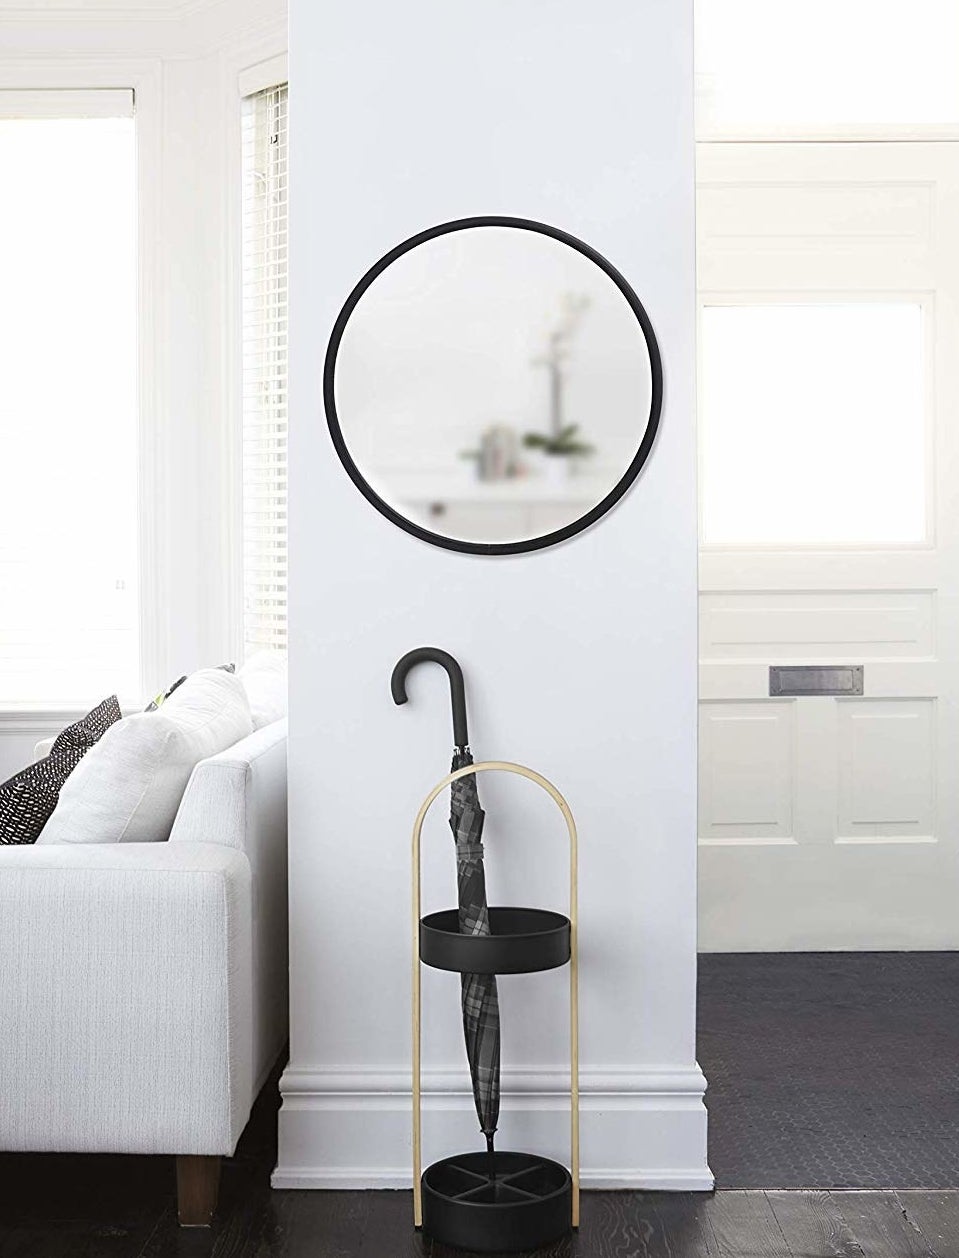 The round mirror is hung on a narrow wall above an umbrella stand